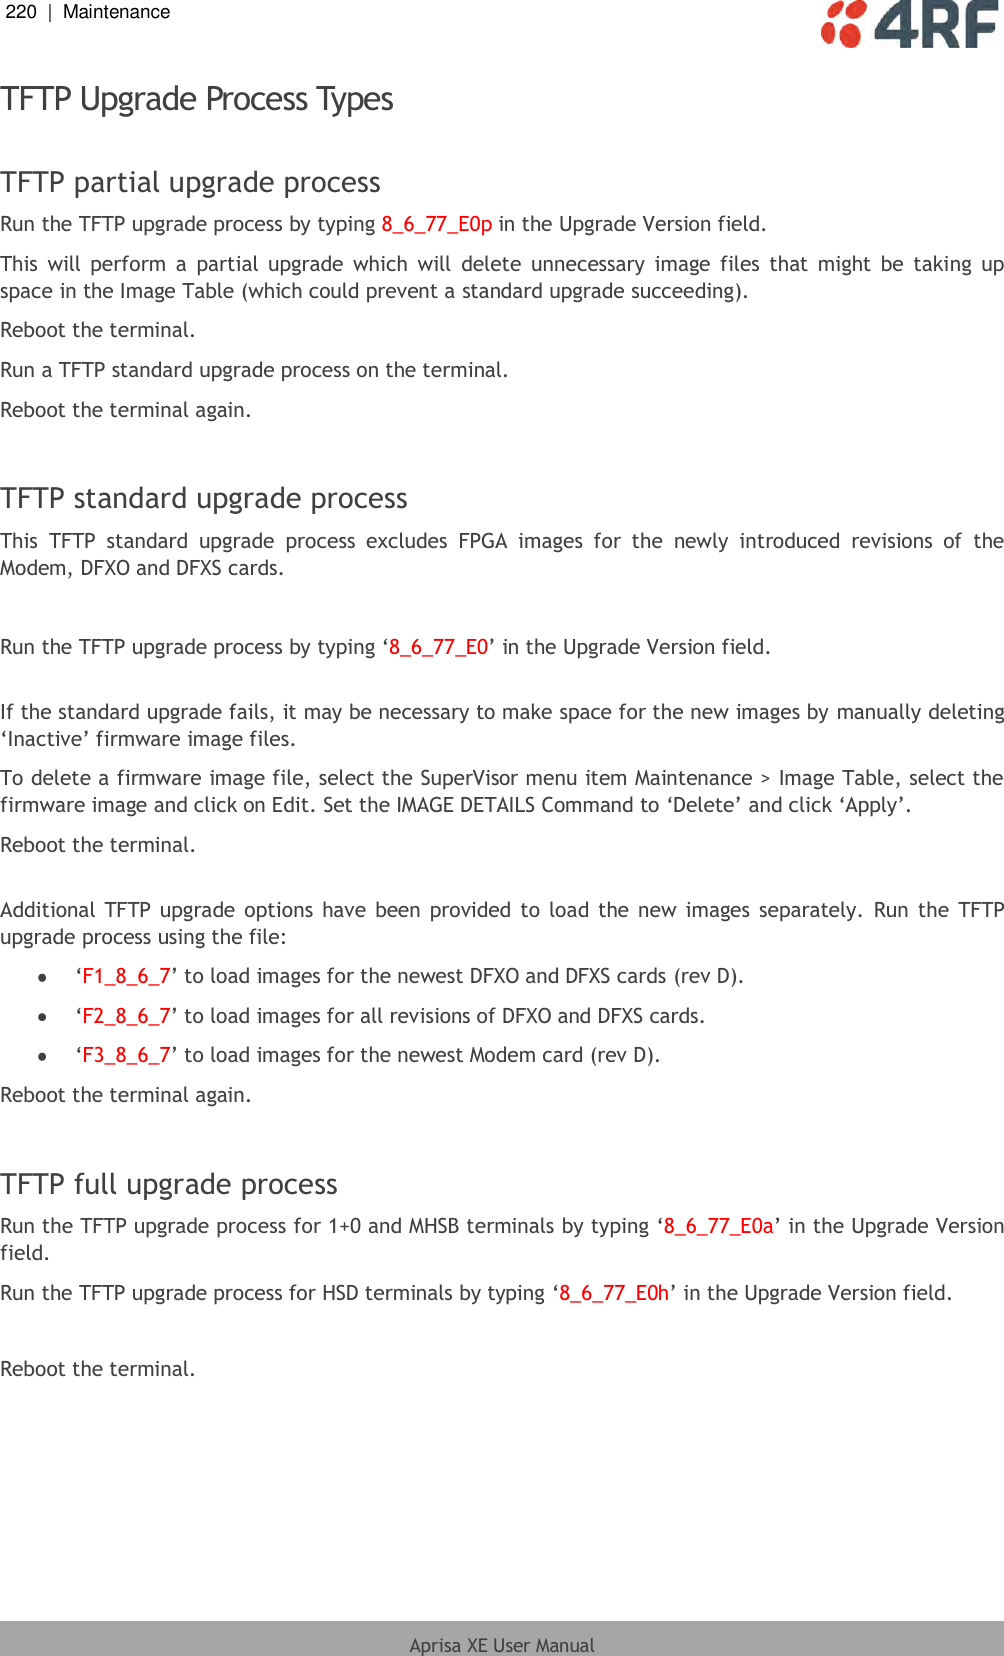 220  |  Maintenance   Aprisa XE User Manual  TFTP Upgrade Process Types  TFTP partial upgrade process Run the TFTP upgrade process by typing 8_6_77_E0p in the Upgrade Version field. This  will perform  a  partial  upgrade  which  will  delete  unnecessary  image  files  that  might  be  taking  up space in the Image Table (which could prevent a standard upgrade succeeding). Reboot the terminal. Run a TFTP standard upgrade process on the terminal. Reboot the terminal again.  TFTP standard upgrade process This  TFTP  standard  upgrade  process  excludes  FPGA  images  for  the  newly  introduced  revisions  of  the Modem, DFXO and DFXS cards.  Run the TFTP upgrade process by typing ‘8_6_77_E0’ in the Upgrade Version field.  If the standard upgrade fails, it may be necessary to make space for the new images by manually deleting ‘Inactive’ firmware image files. To delete a firmware image file, select the SuperVisor menu item Maintenance &gt; Image Table, select the firmware image and click on Edit. Set the IMAGE DETAILS Command to ‘Delete’ and click ‘Apply’. Reboot the terminal.  Additional TFTP upgrade options  have been  provided to load the new images separately.  Run the TFTP upgrade process using the file:  ‘F1_8_6_7’ to load images for the newest DFXO and DFXS cards (rev D).  ‘F2_8_6_7’ to load images for all revisions of DFXO and DFXS cards.  ‘F3_8_6_7’ to load images for the newest Modem card (rev D). Reboot the terminal again.  TFTP full upgrade process Run the TFTP upgrade process for 1+0 and MHSB terminals by typing ‘8_6_77_E0a’ in the Upgrade Version field. Run the TFTP upgrade process for HSD terminals by typing ‘8_6_77_E0h’ in the Upgrade Version field.  Reboot the terminal. 